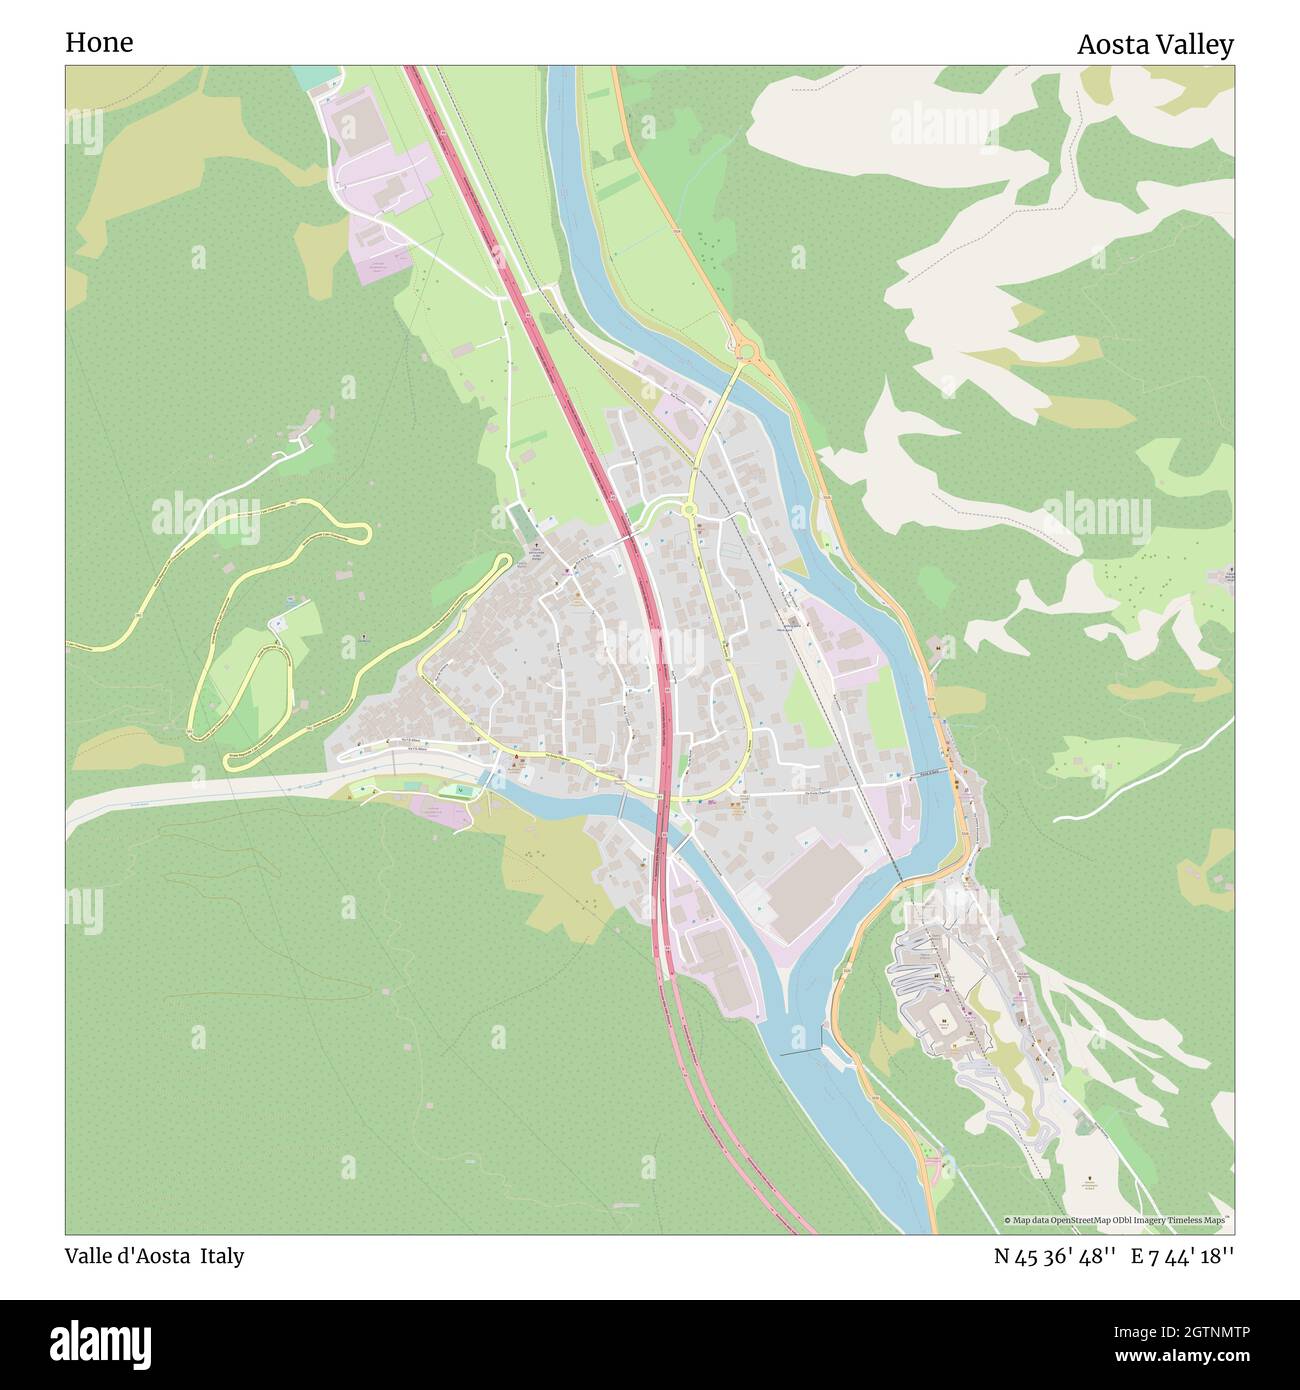 Hone, Valle d'Aosta, Italy, Aosta Valley, N 45 36' 48'', E 7 44' 18'', map, Timeless Map published in 2021. Travelers, explorers and adventurers like Florence Nightingale, David Livingstone, Ernest Shackleton, Lewis and Clark and Sherlock Holmes relied on maps to plan travels to the world's most remote corners, Timeless Maps is mapping most locations on the globe, showing the achievement of great dreams Stock Photo